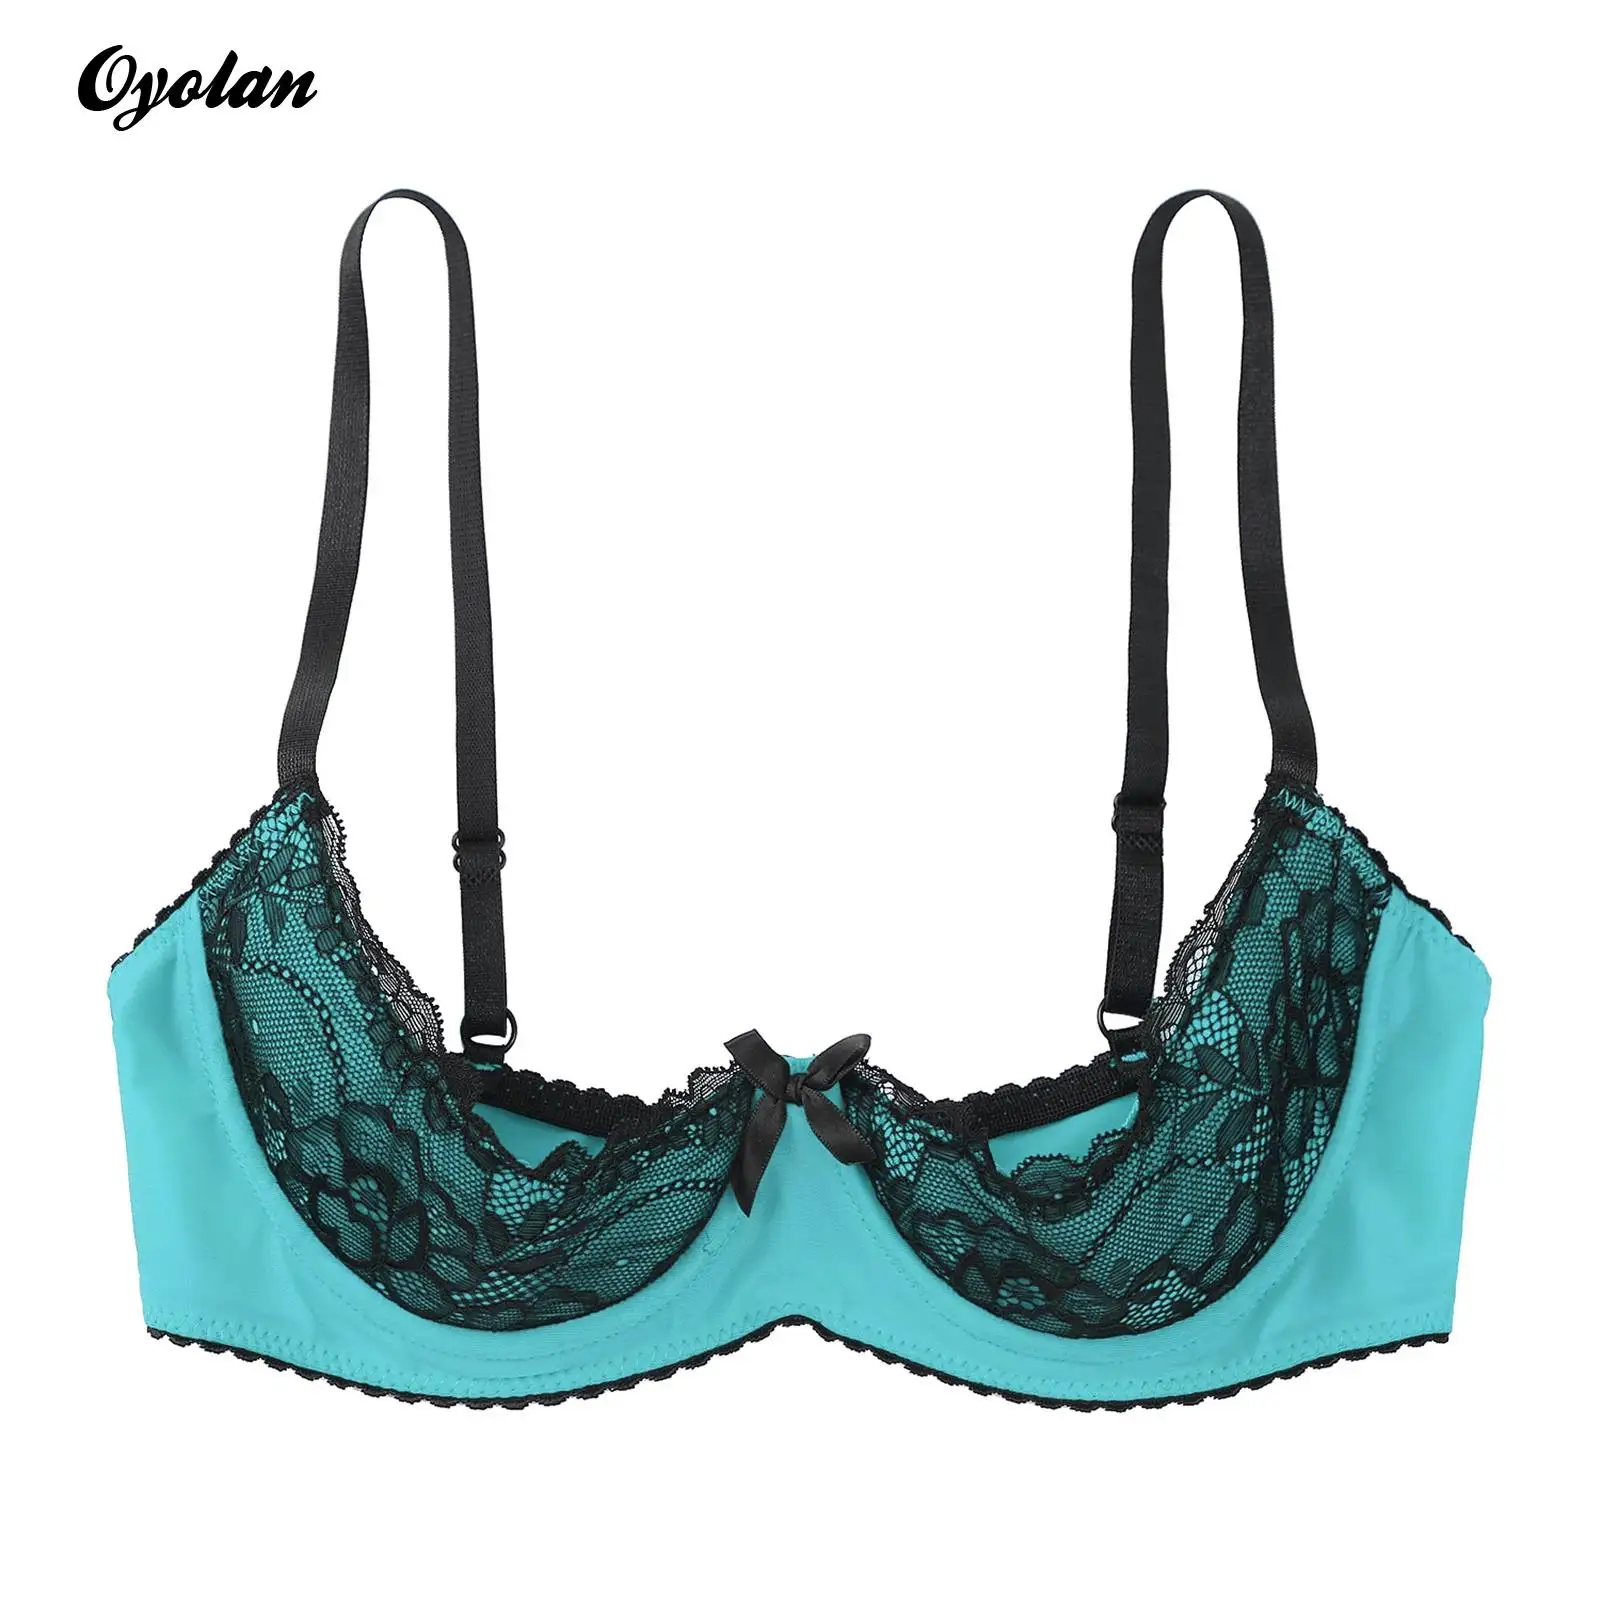  Oyolan Women's Lingerie See-Through Lace Open Nipple